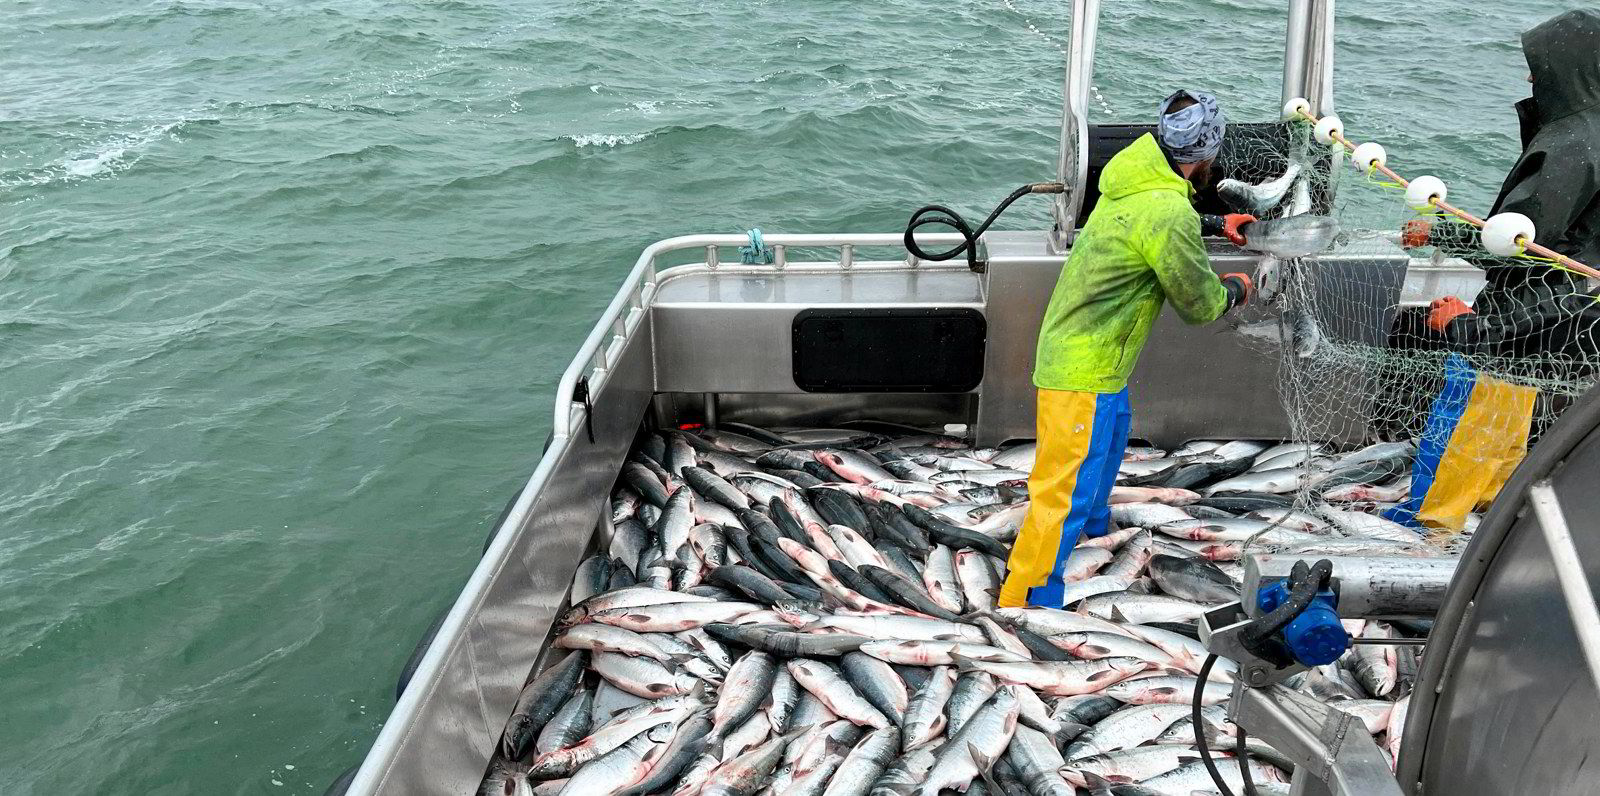 We fish for unknown prices, and the markets have our fish before they tell  us the price:' Bristol Bay fishermen under crushing financial hardship look  to lawmakers for help